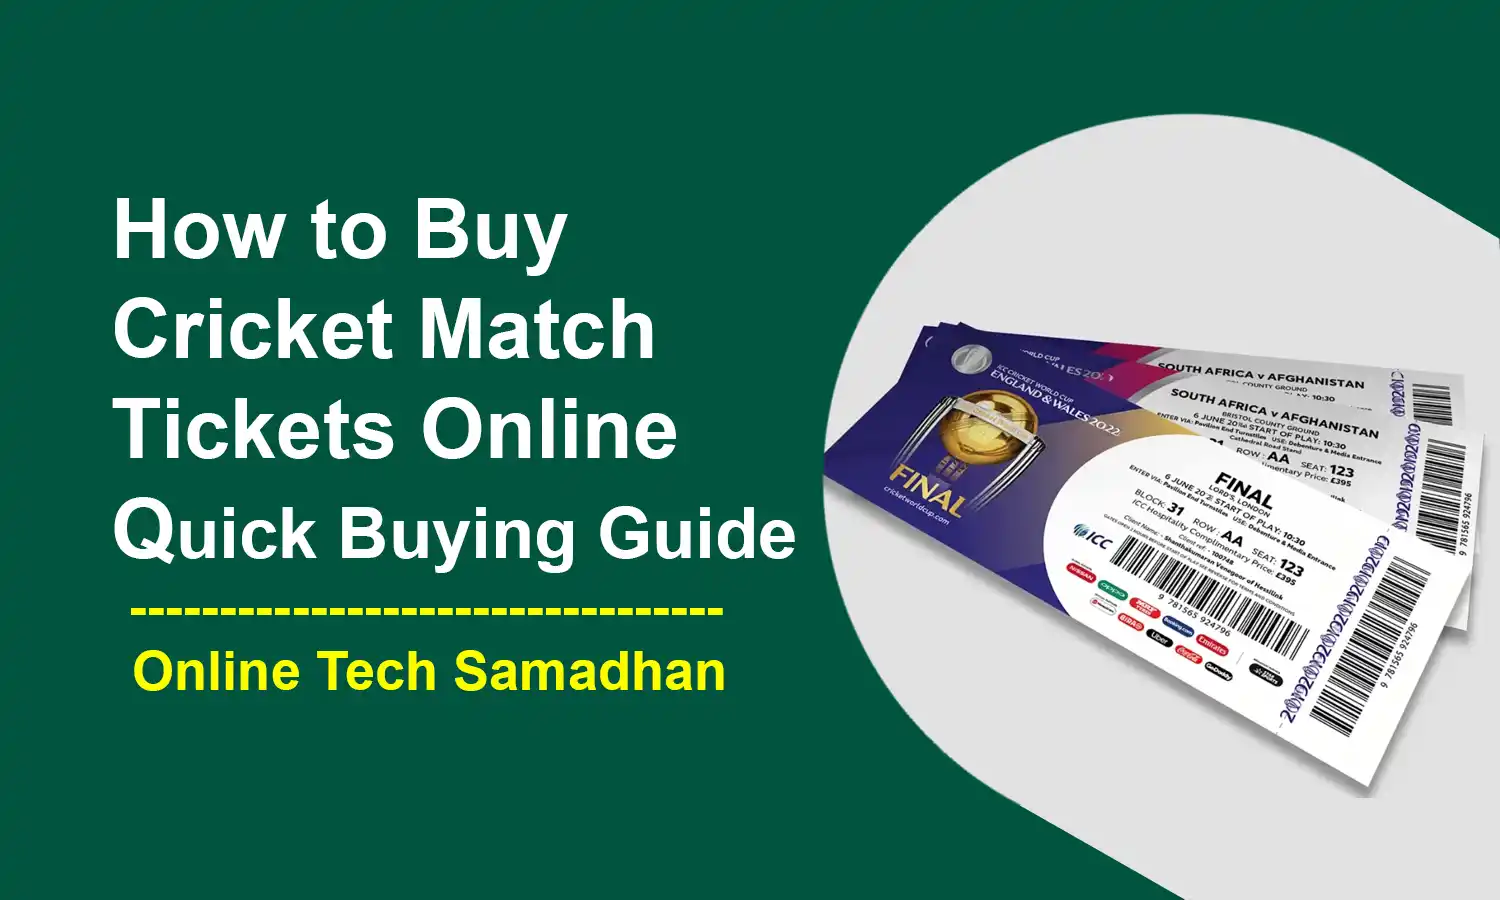 How to Buy Cricket Match Tickets